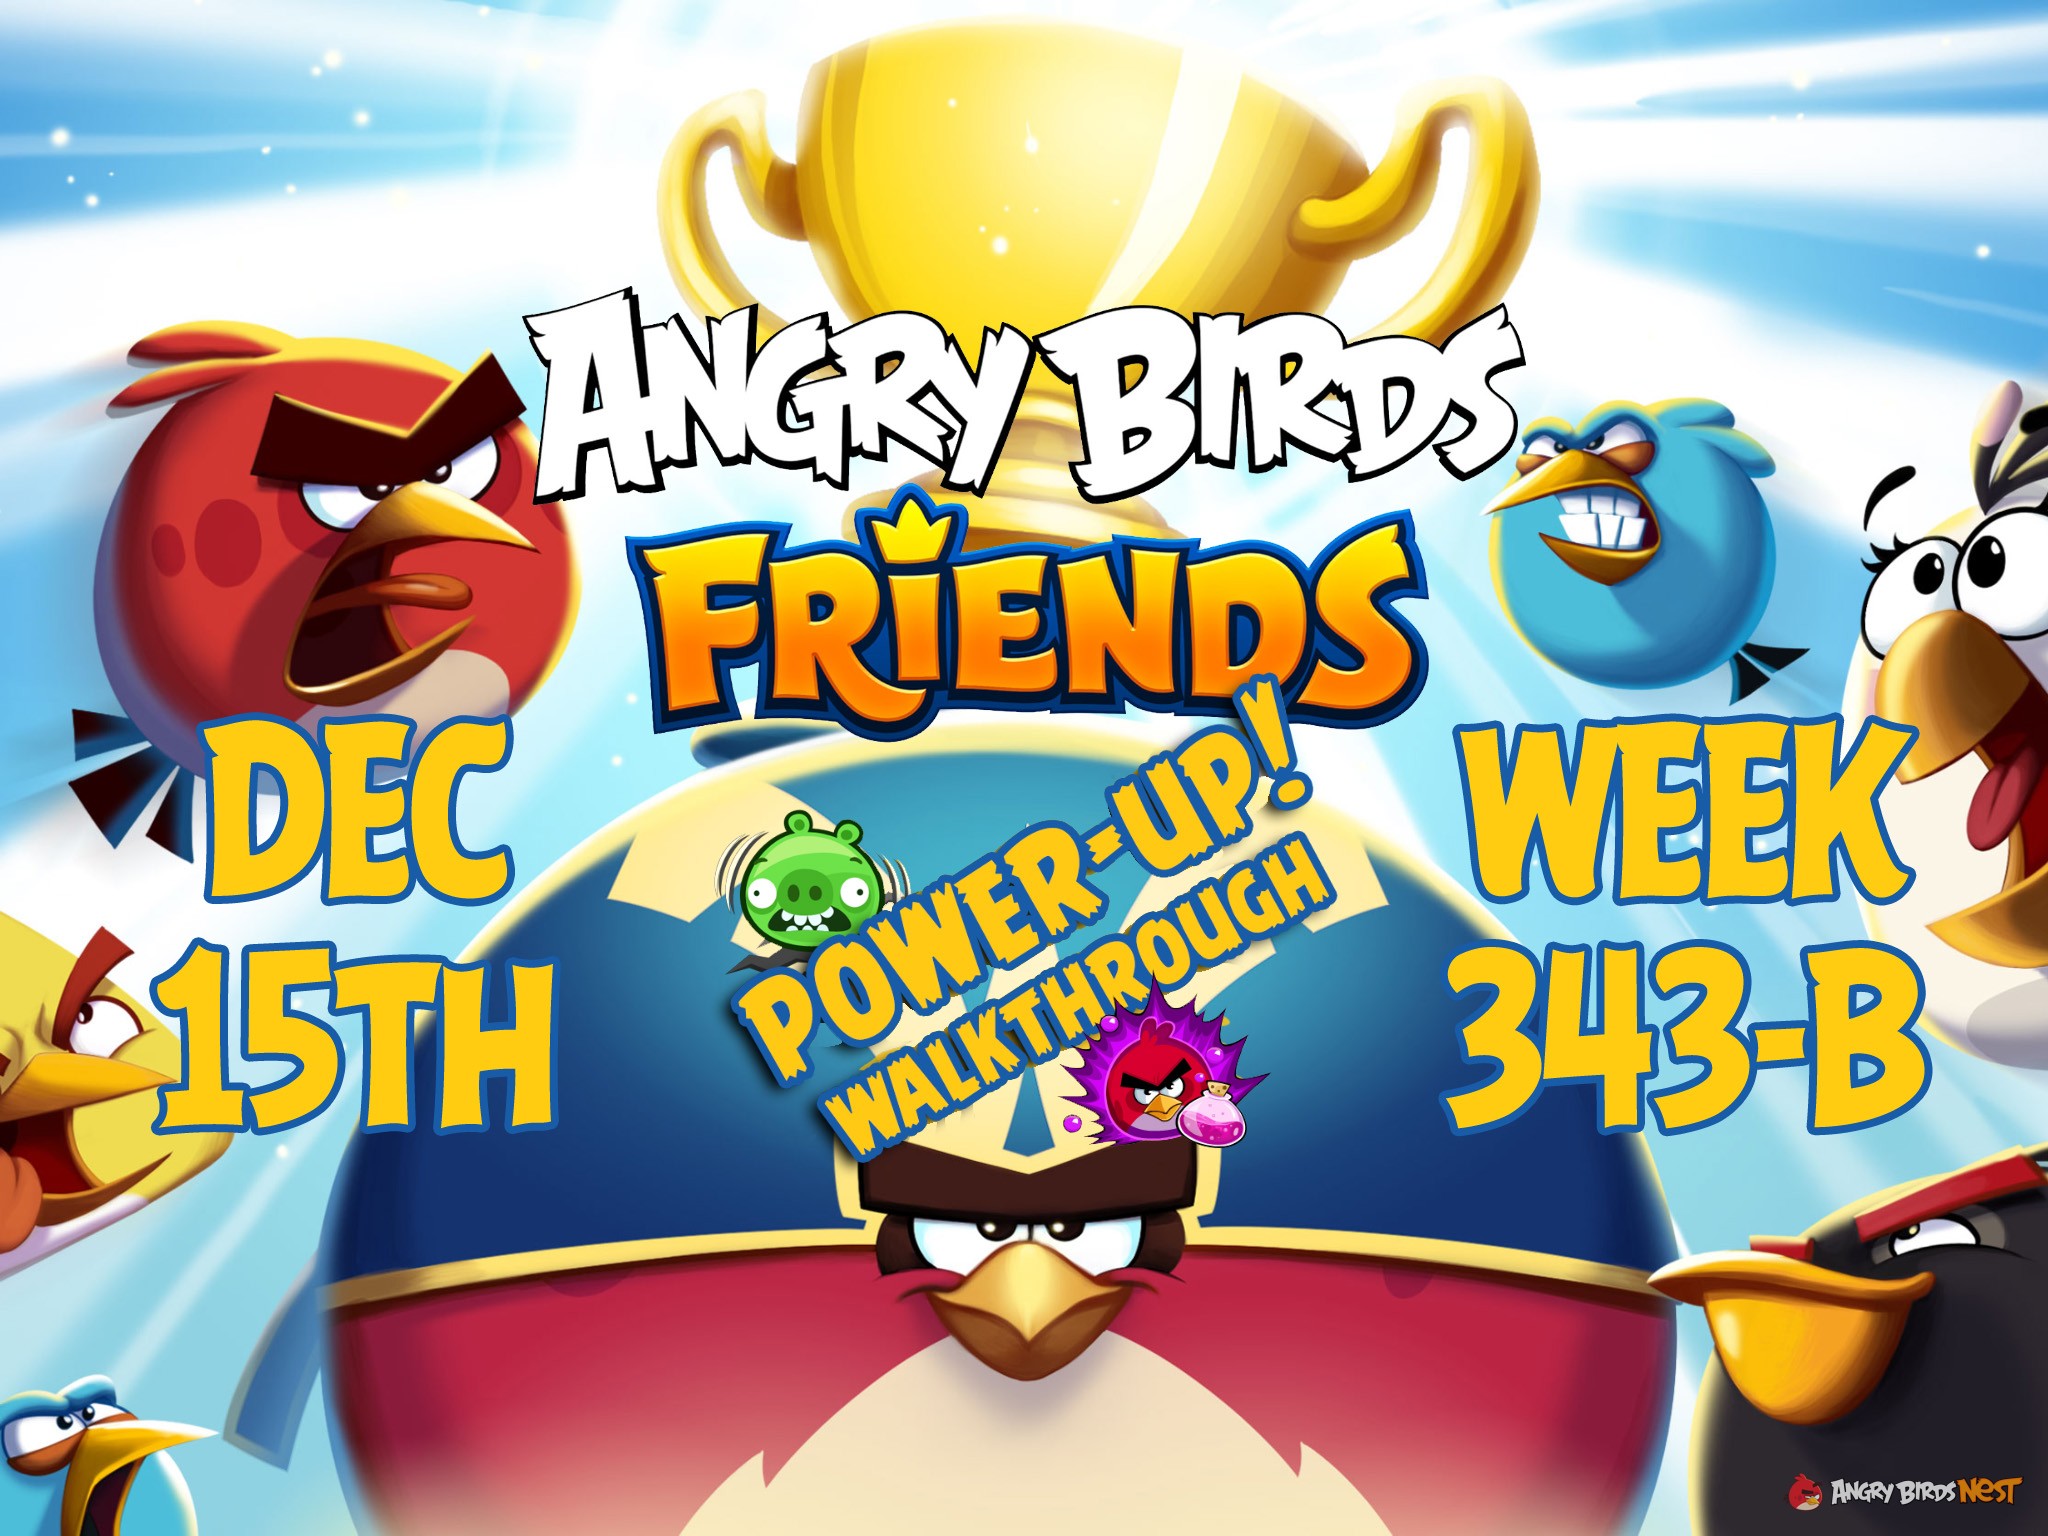 Angry-Birds-Friends-Tournament-Week-343-B-Feature-Image-PU